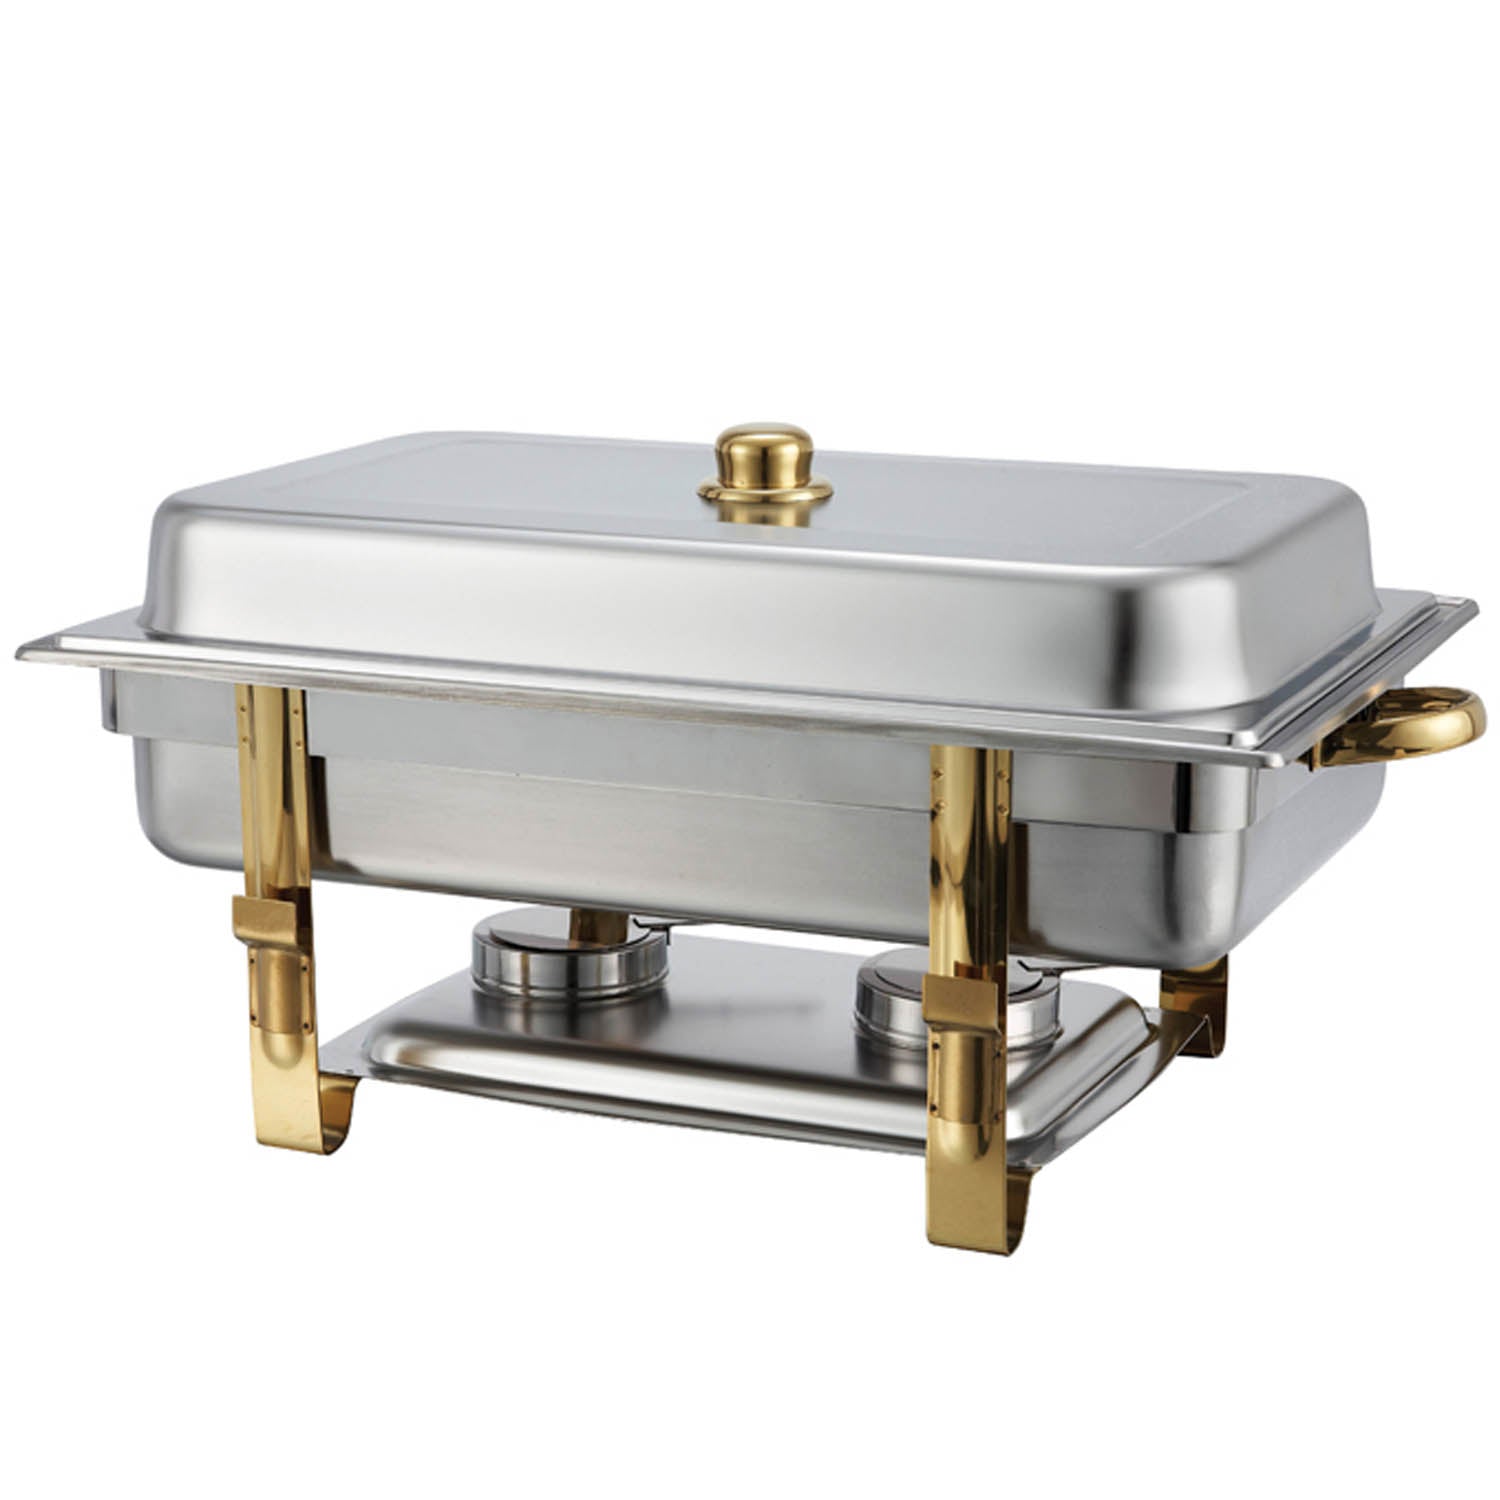 the rectangular malibu chafing dish is the perfect addition to any get together It can hold up to eight quarts of food and is made of stainless steel durable and easy to clean chafing dish deluxe set for catering large gatherings dining easy refills transportation dent rust resistant safe for food keeps food warm for longer